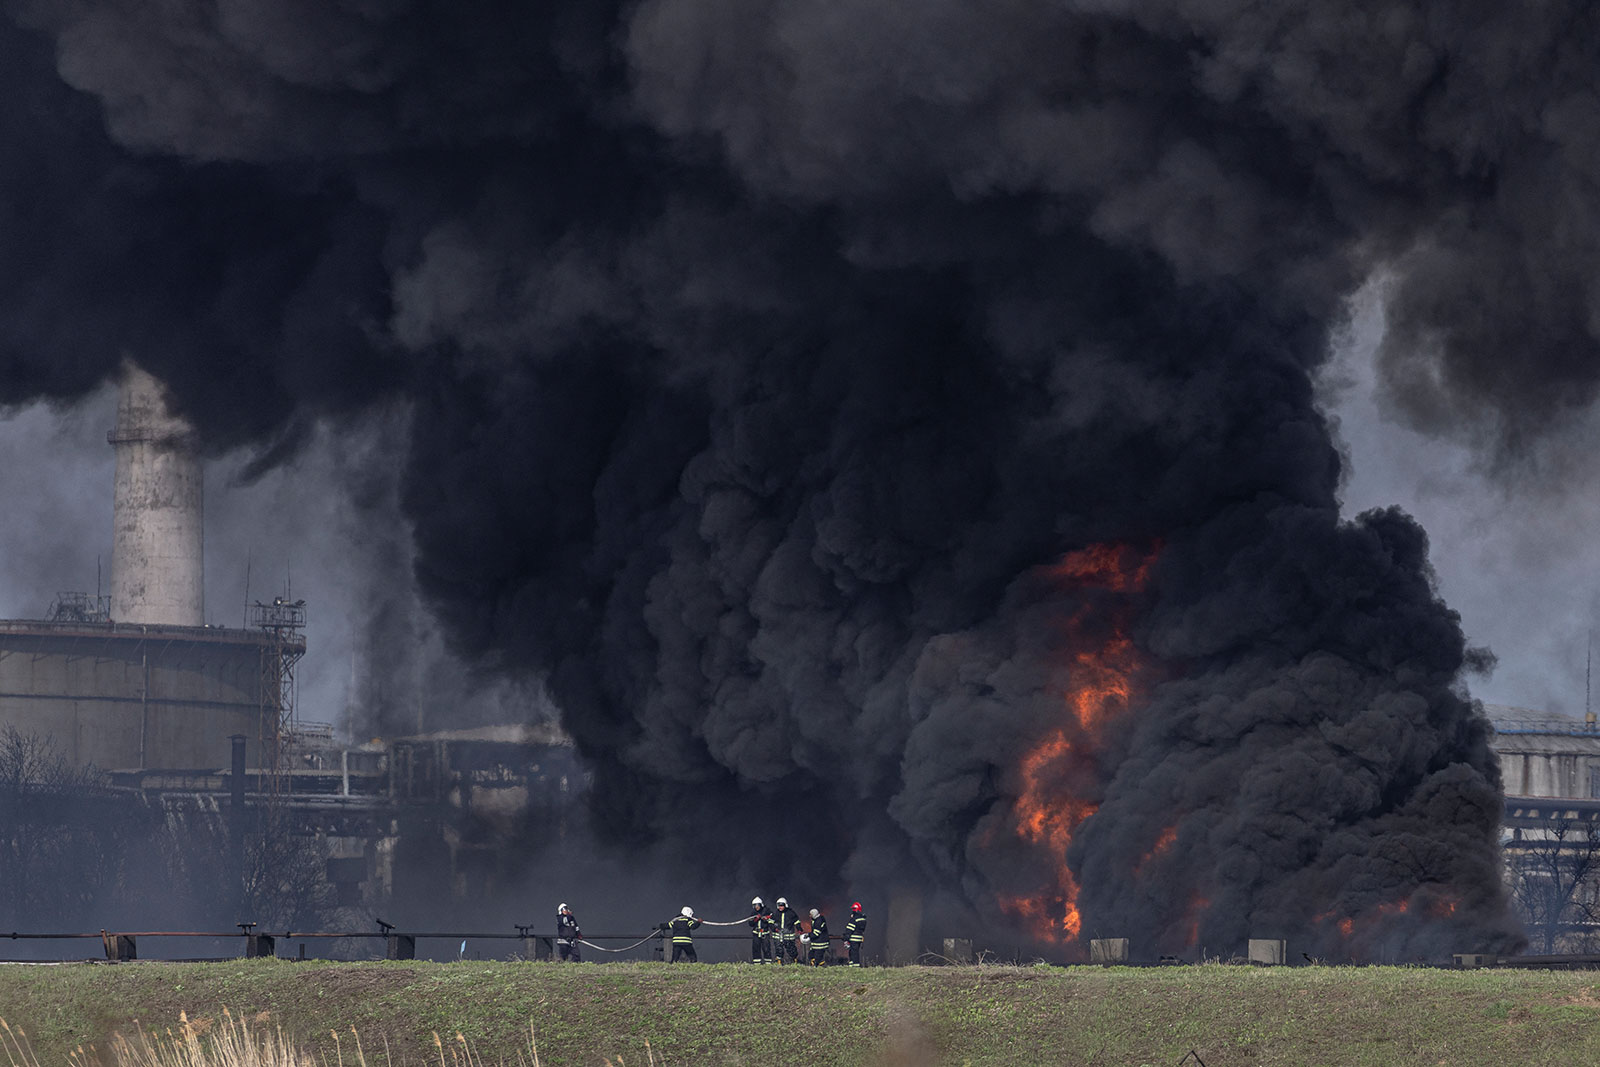 Firefighters work to put out a fire at an oil refinery in Lysychansk after if was hit by a missile in the Luhansk region, Ukraine, on Saturday, April 16. 